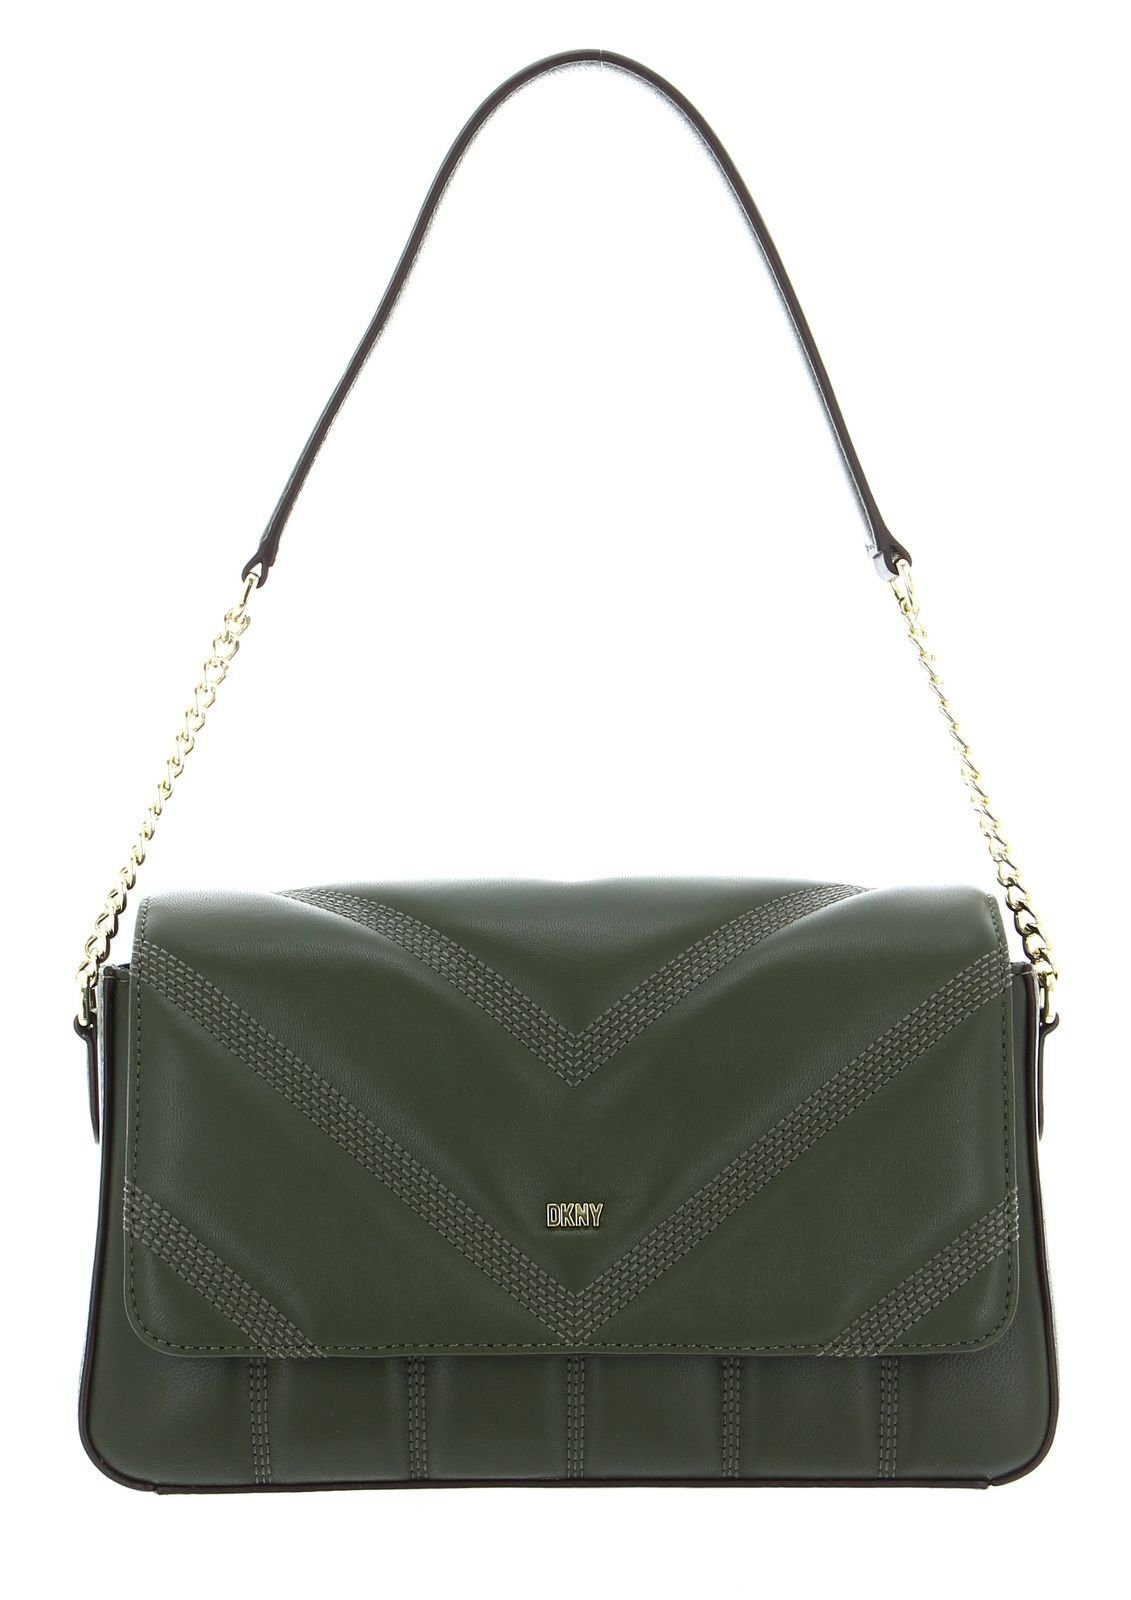 Becca Army Schultertasche DKNY Green